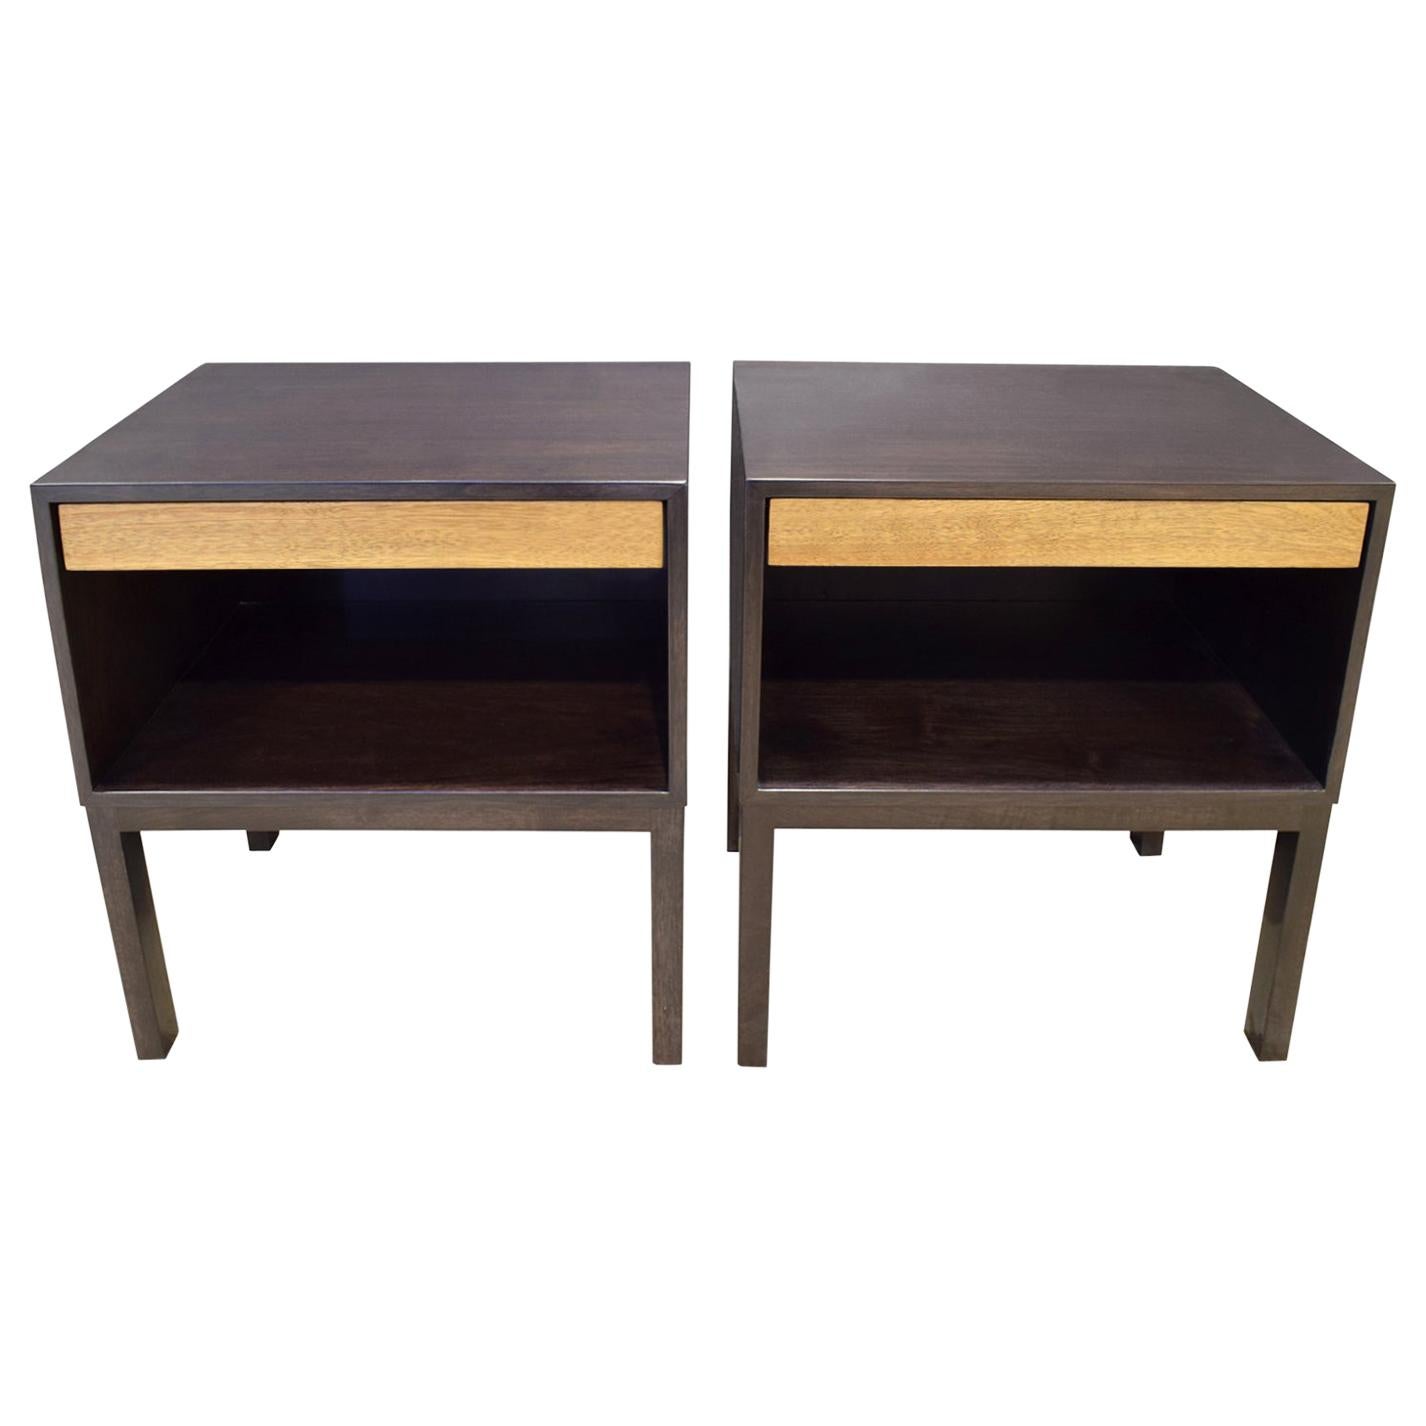 Edward Wormley Pair of Bedside Tables in Mahogany 1940s 'Signed'